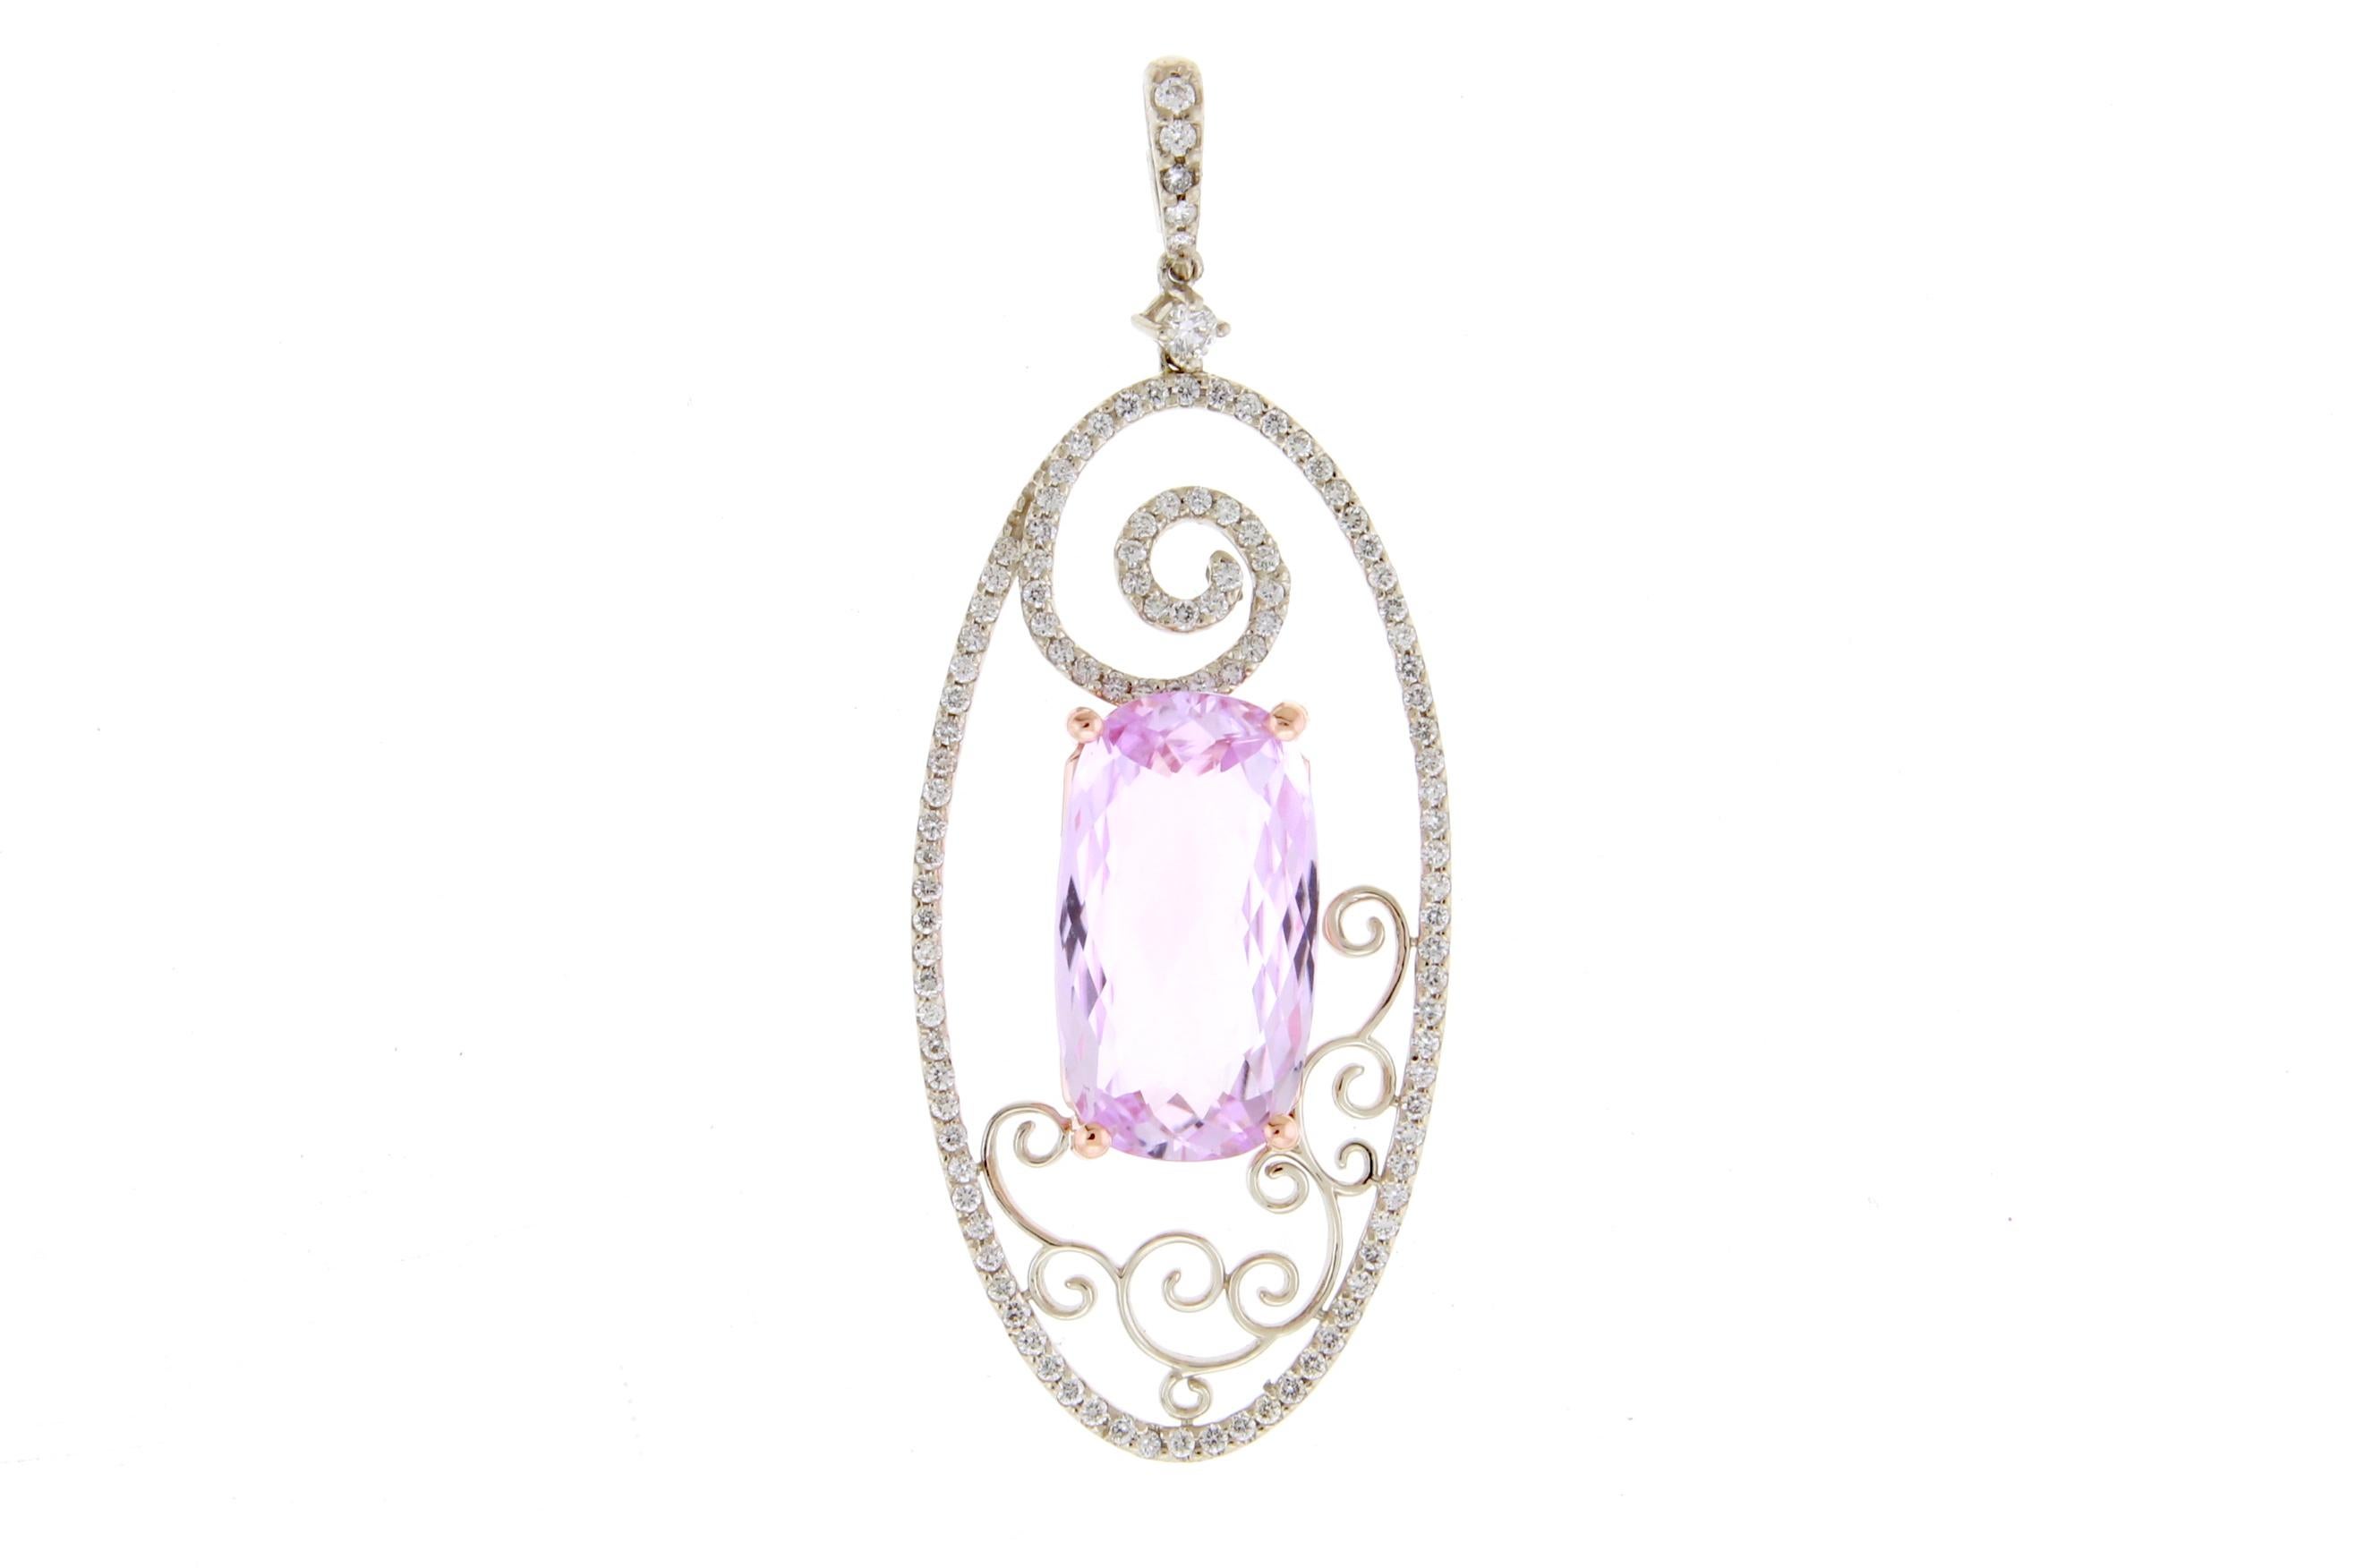 Material: 14k White Gold 
Center Stone Details: 9.22 Carat Cushion Cut Kunzite - 18 x 10 mm
Diamonds:  115 Round Diamonds at 0.74 Carats.  SI Quality /  H-I Color
Chain:  18 Inch

Fine one-of-a-kind craftsmanship meets incredible quality in this